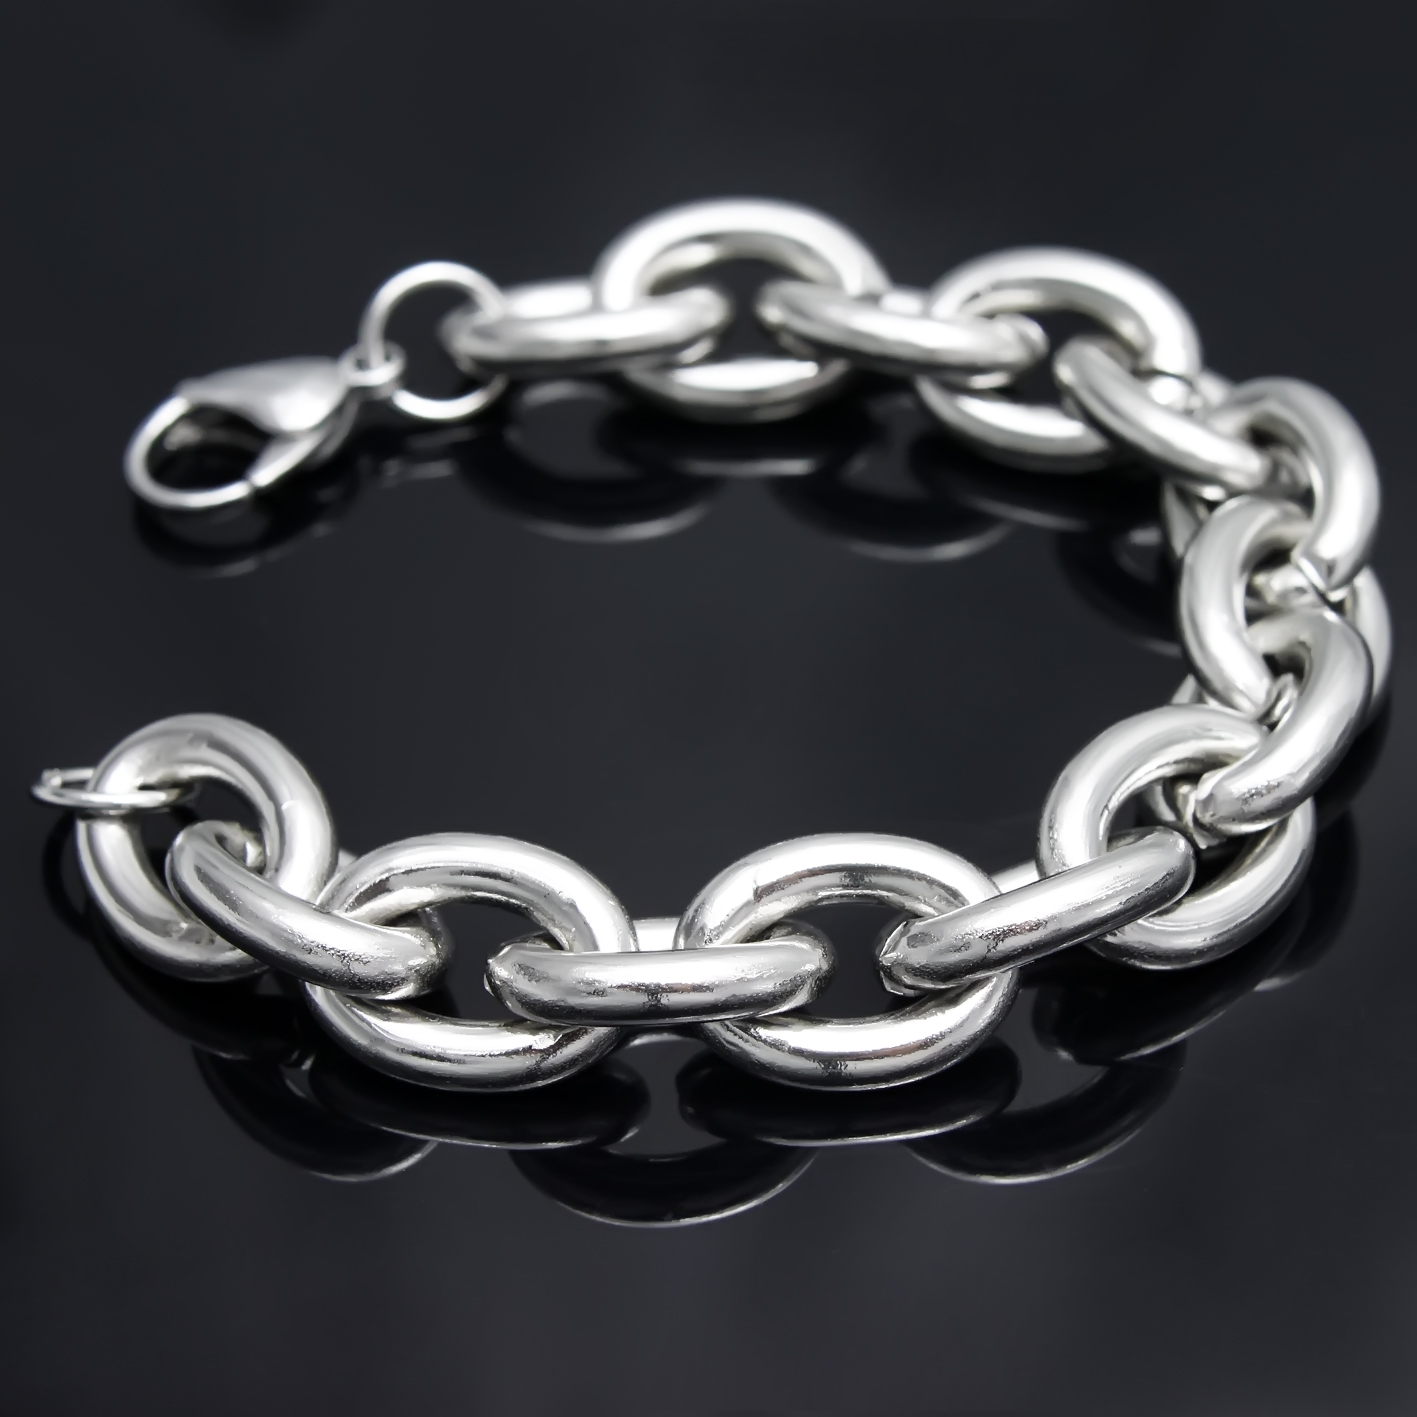 High Quality silver tone 316L Stainless Steel Fashion HEAVY Huge 15mm Oval Link chain bracelet Men&#039;s Jewelry Bangle 8&#039;&#039;-9.5 inch от DHgate WW